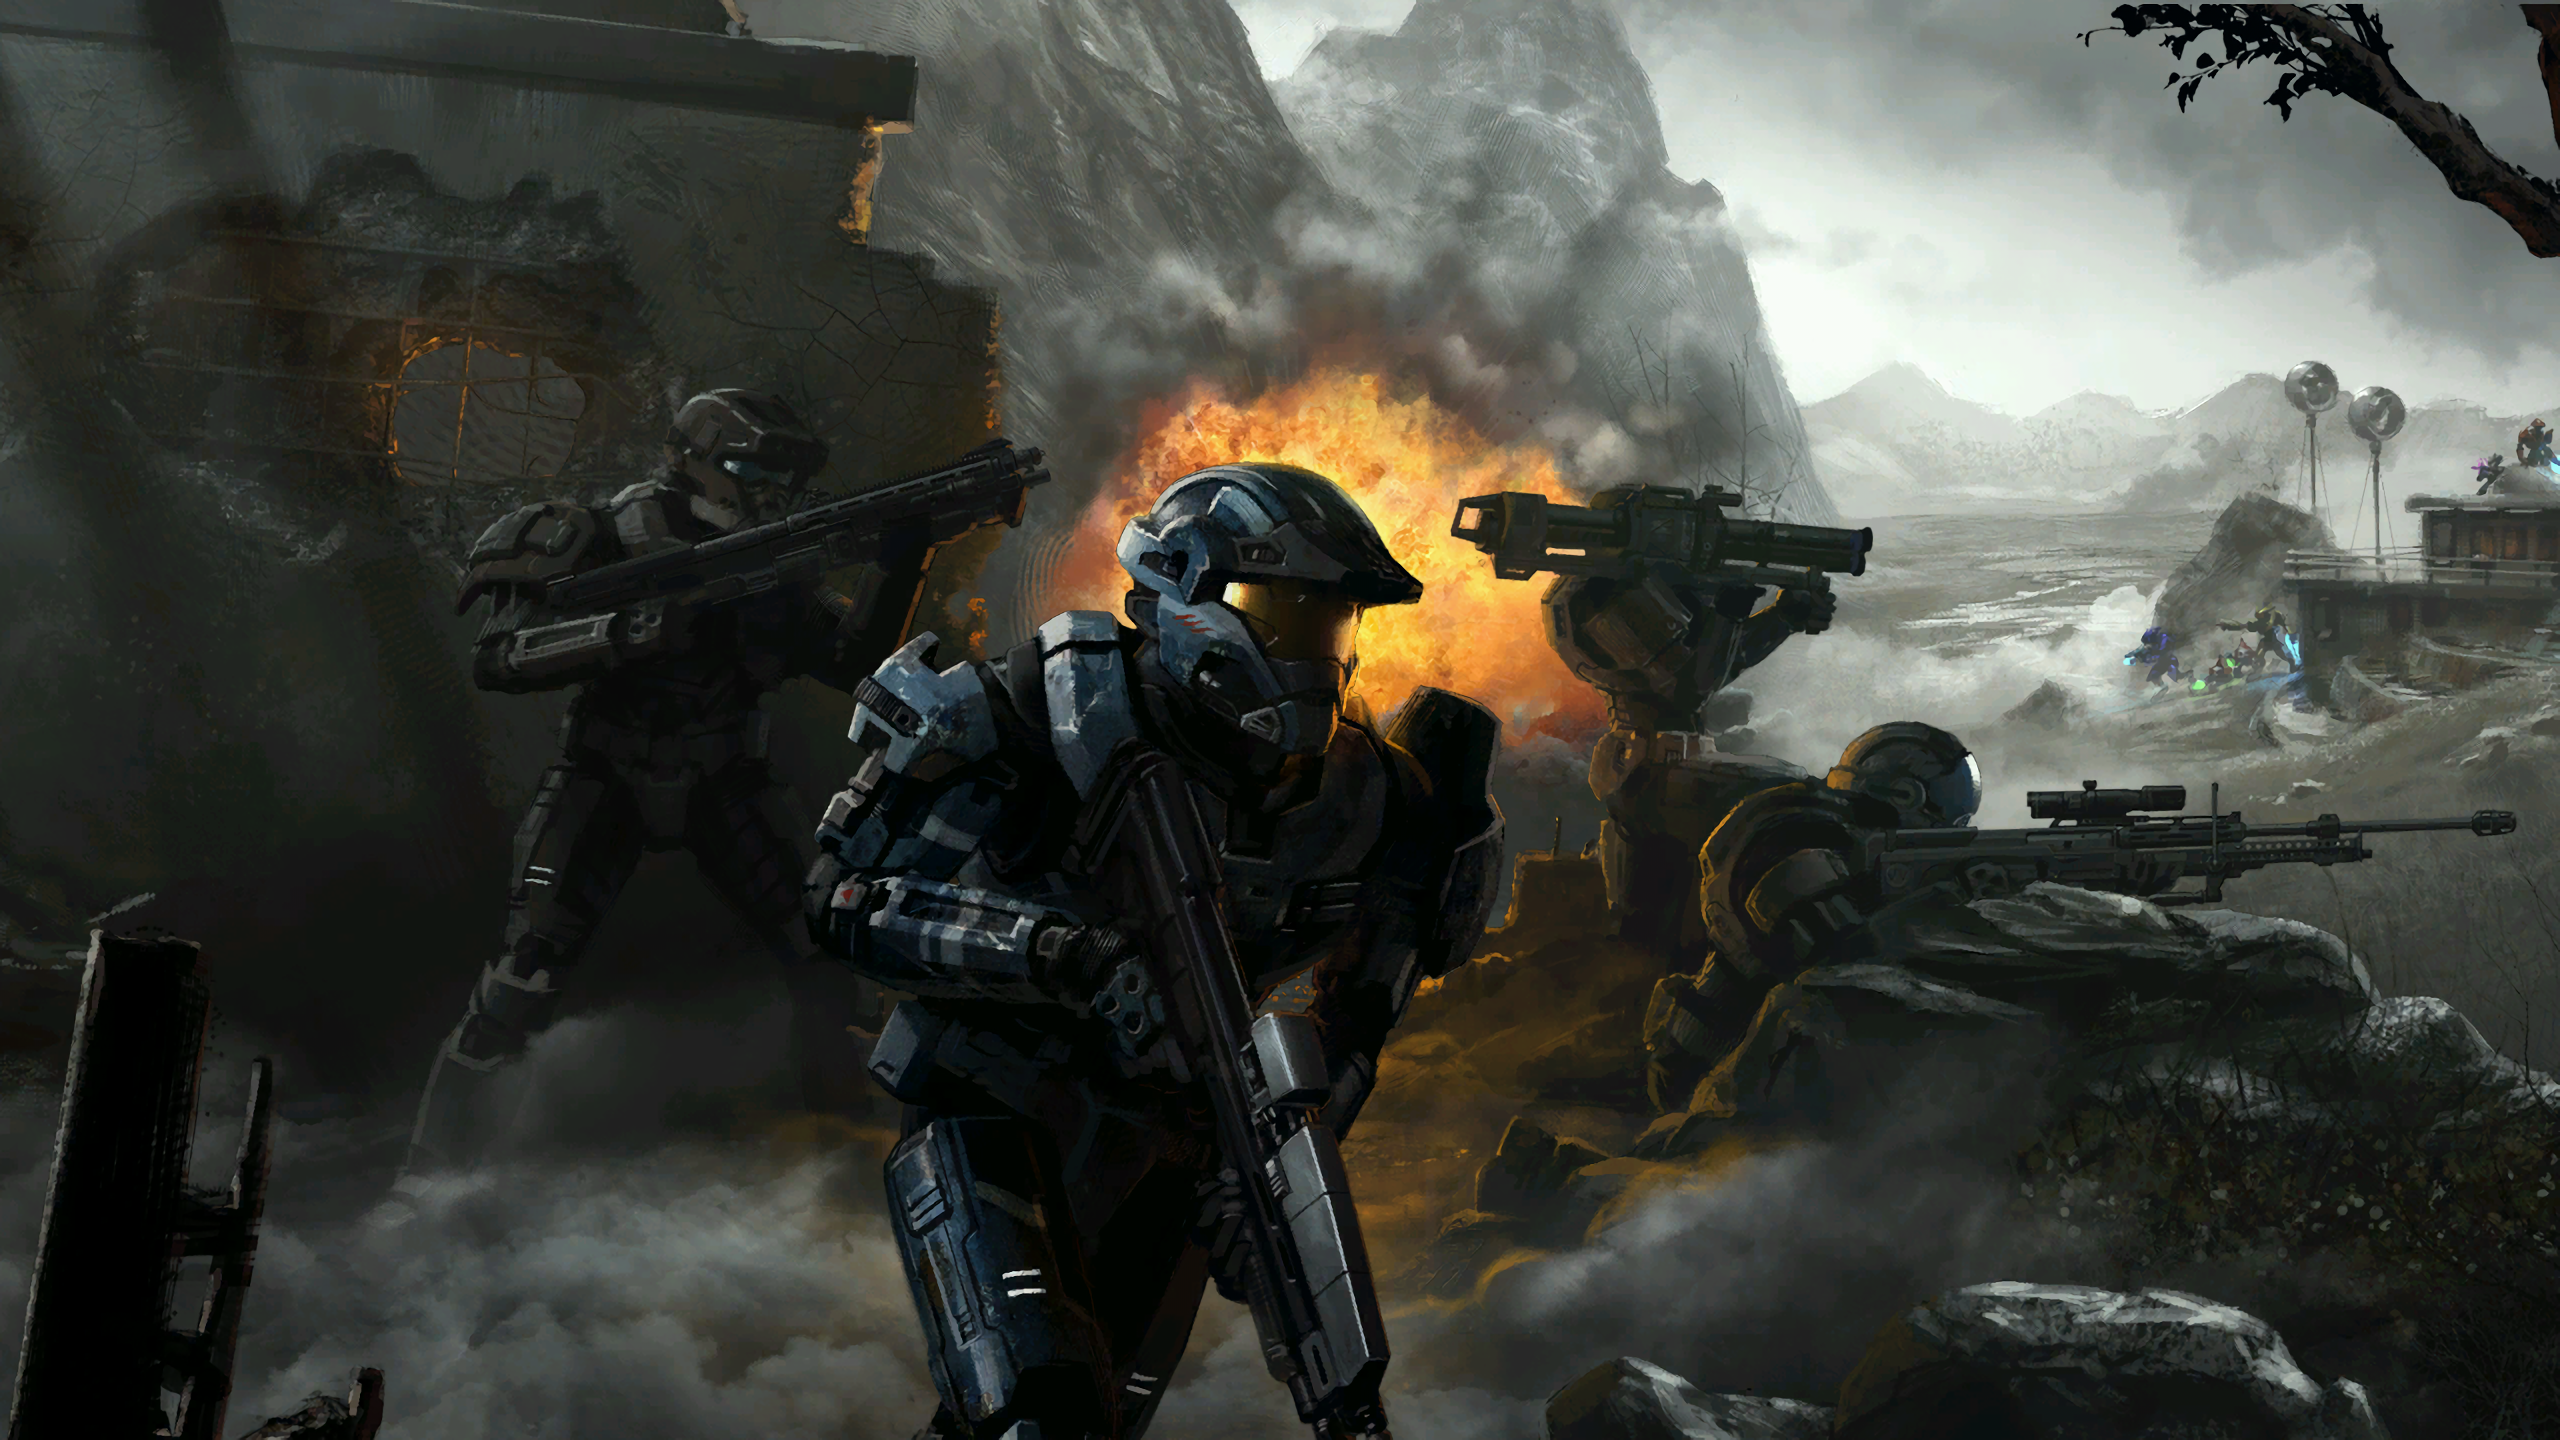 halo wallpaper,action adventure game,pc game,shooter game,games,strategy video game